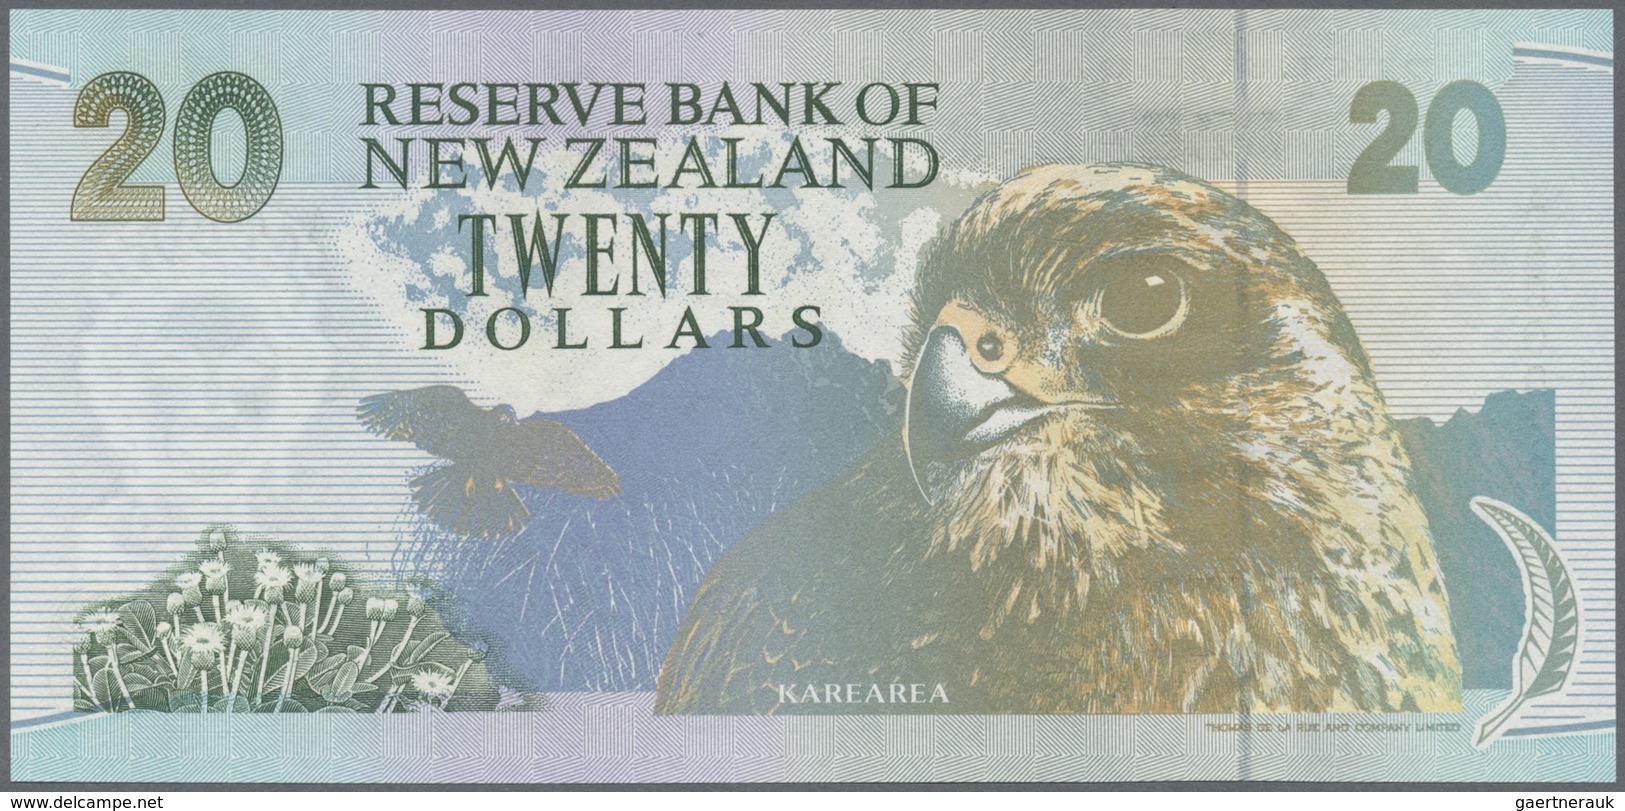 New Zealand / Neuseeland: Set with 6 Banknotes 5, 10, 20, 50 and 100 Dollars ND(1992-99) with matchi